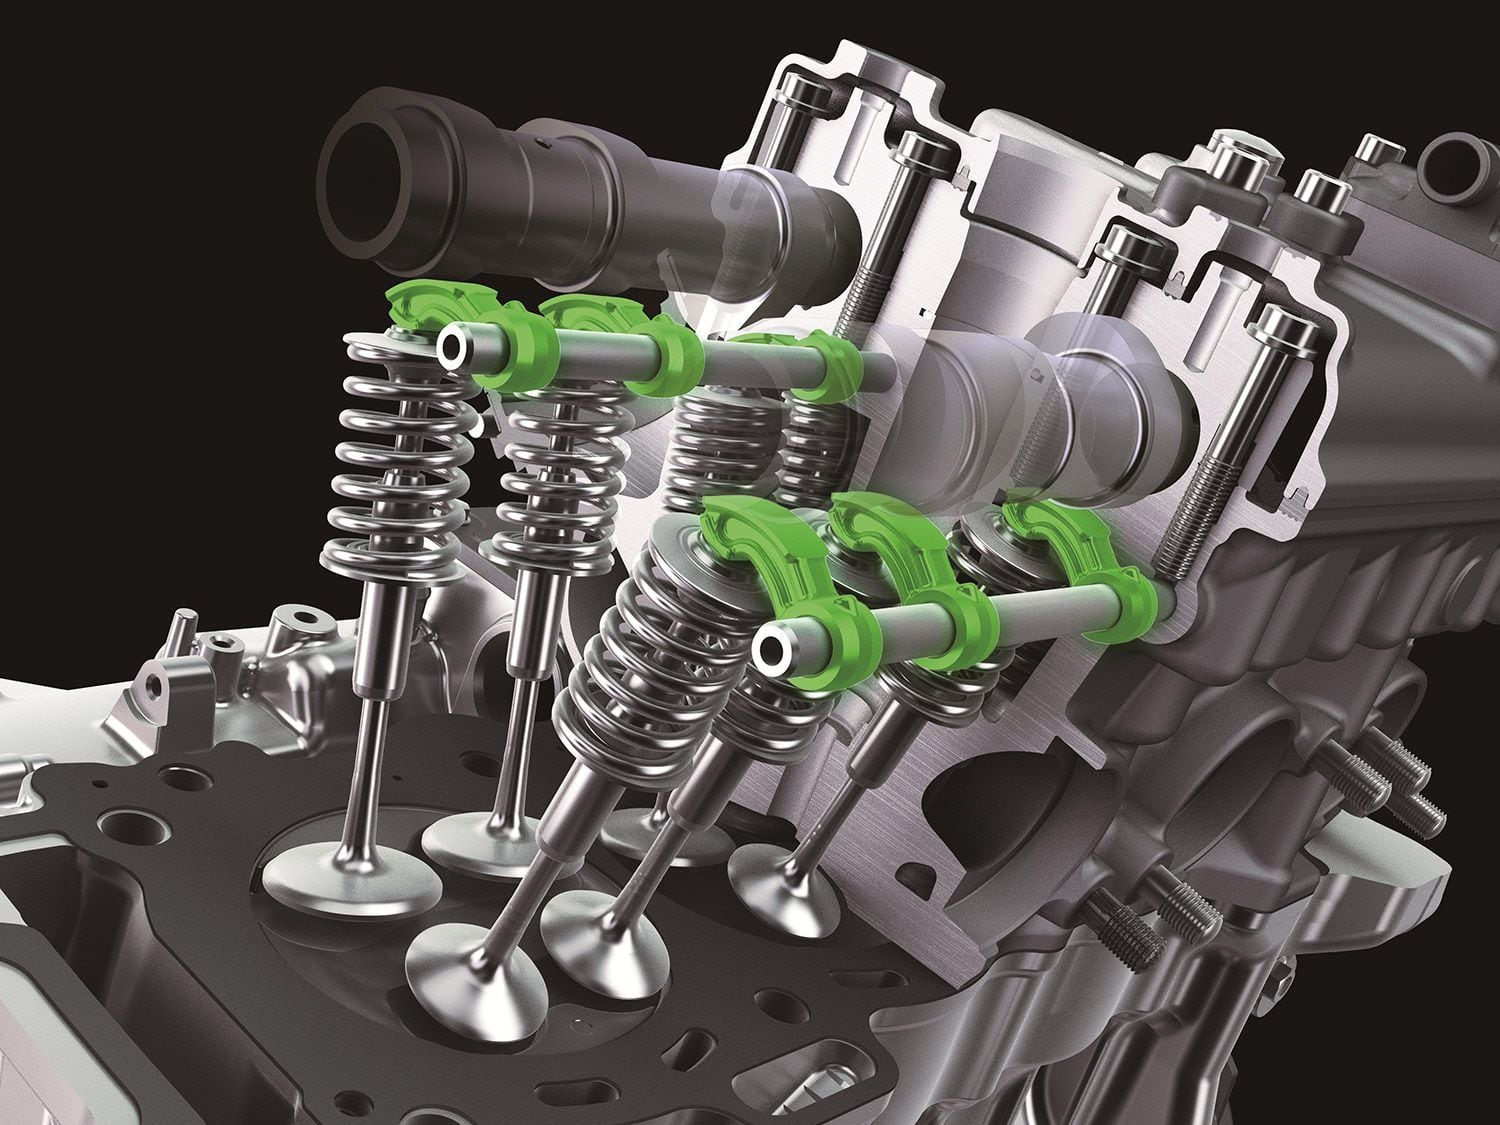 A look inside Kawasaki’s ZX-10R engine illustrates the use of finger followers, which reduce weight allowing higher revs. <i>Kawasaki</i>